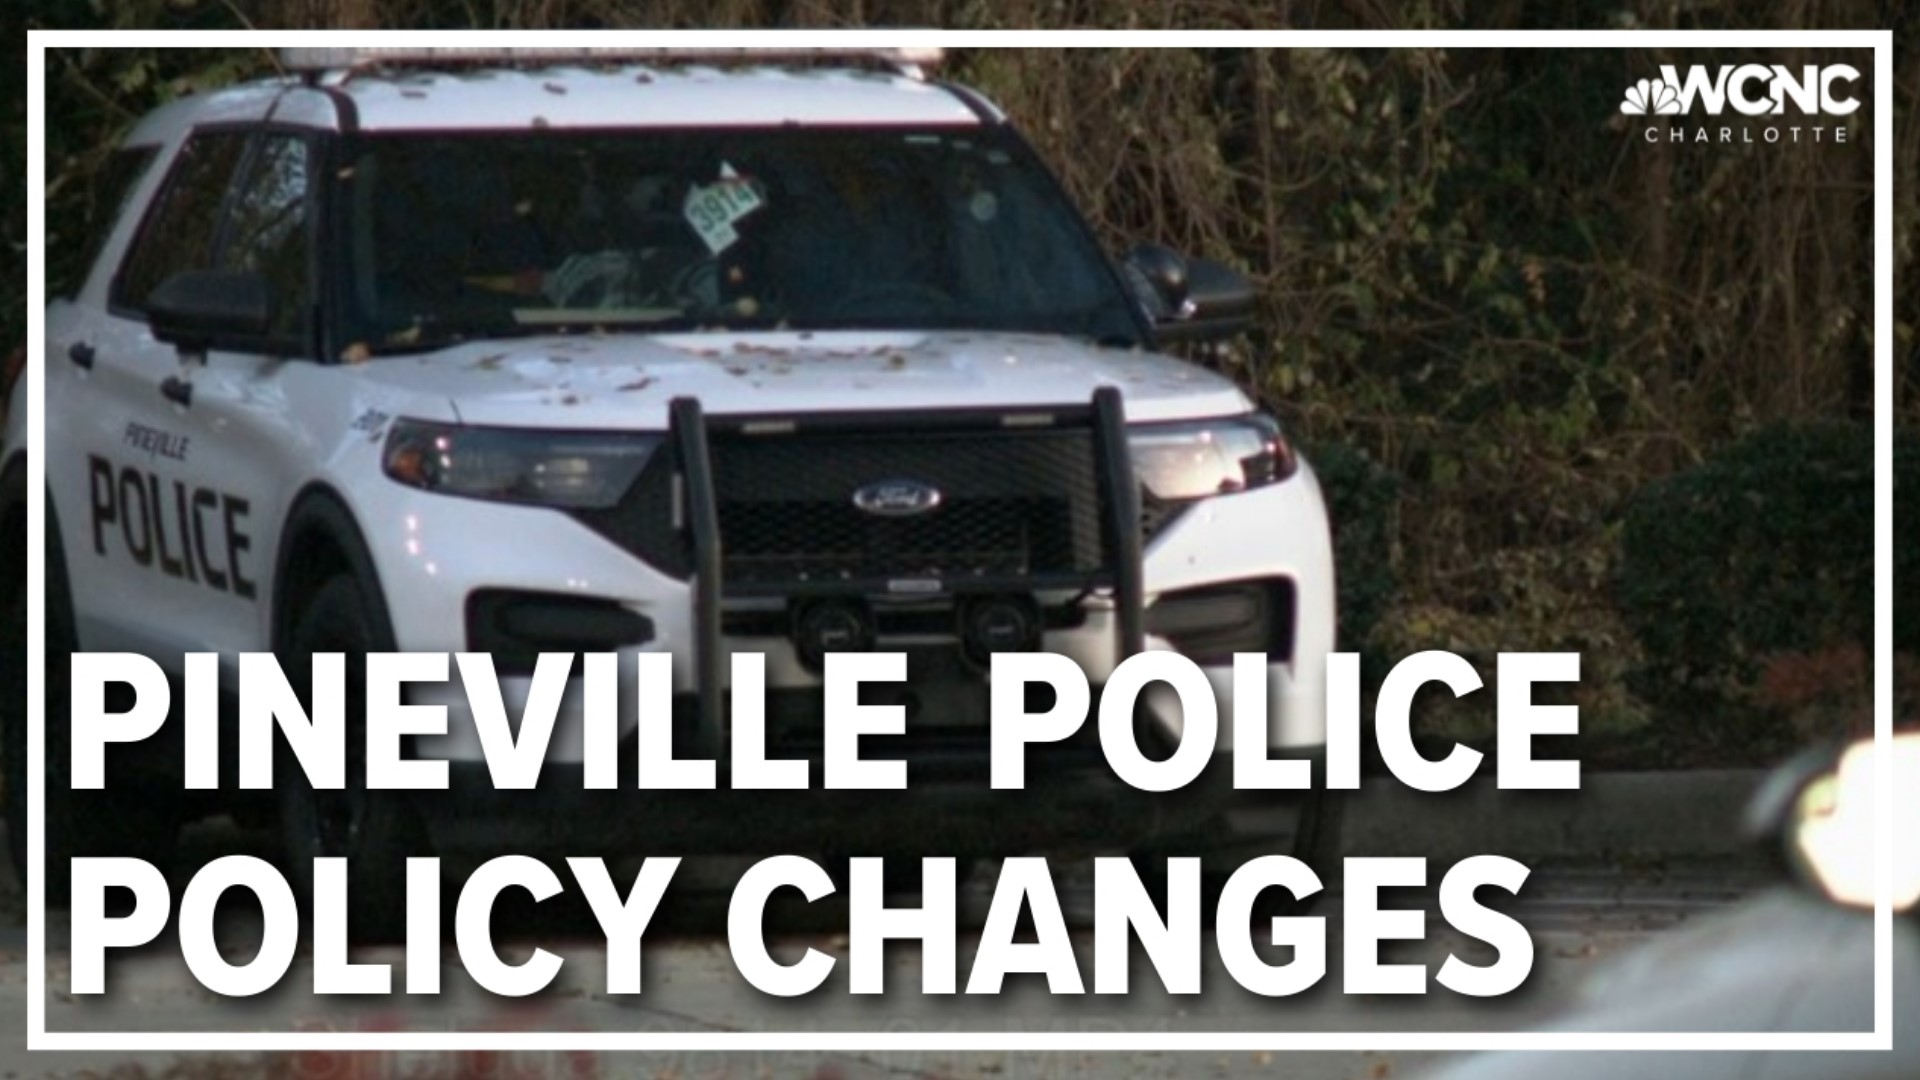 Police reform in Pineville after a woman officers had in custody suffered severe injuries